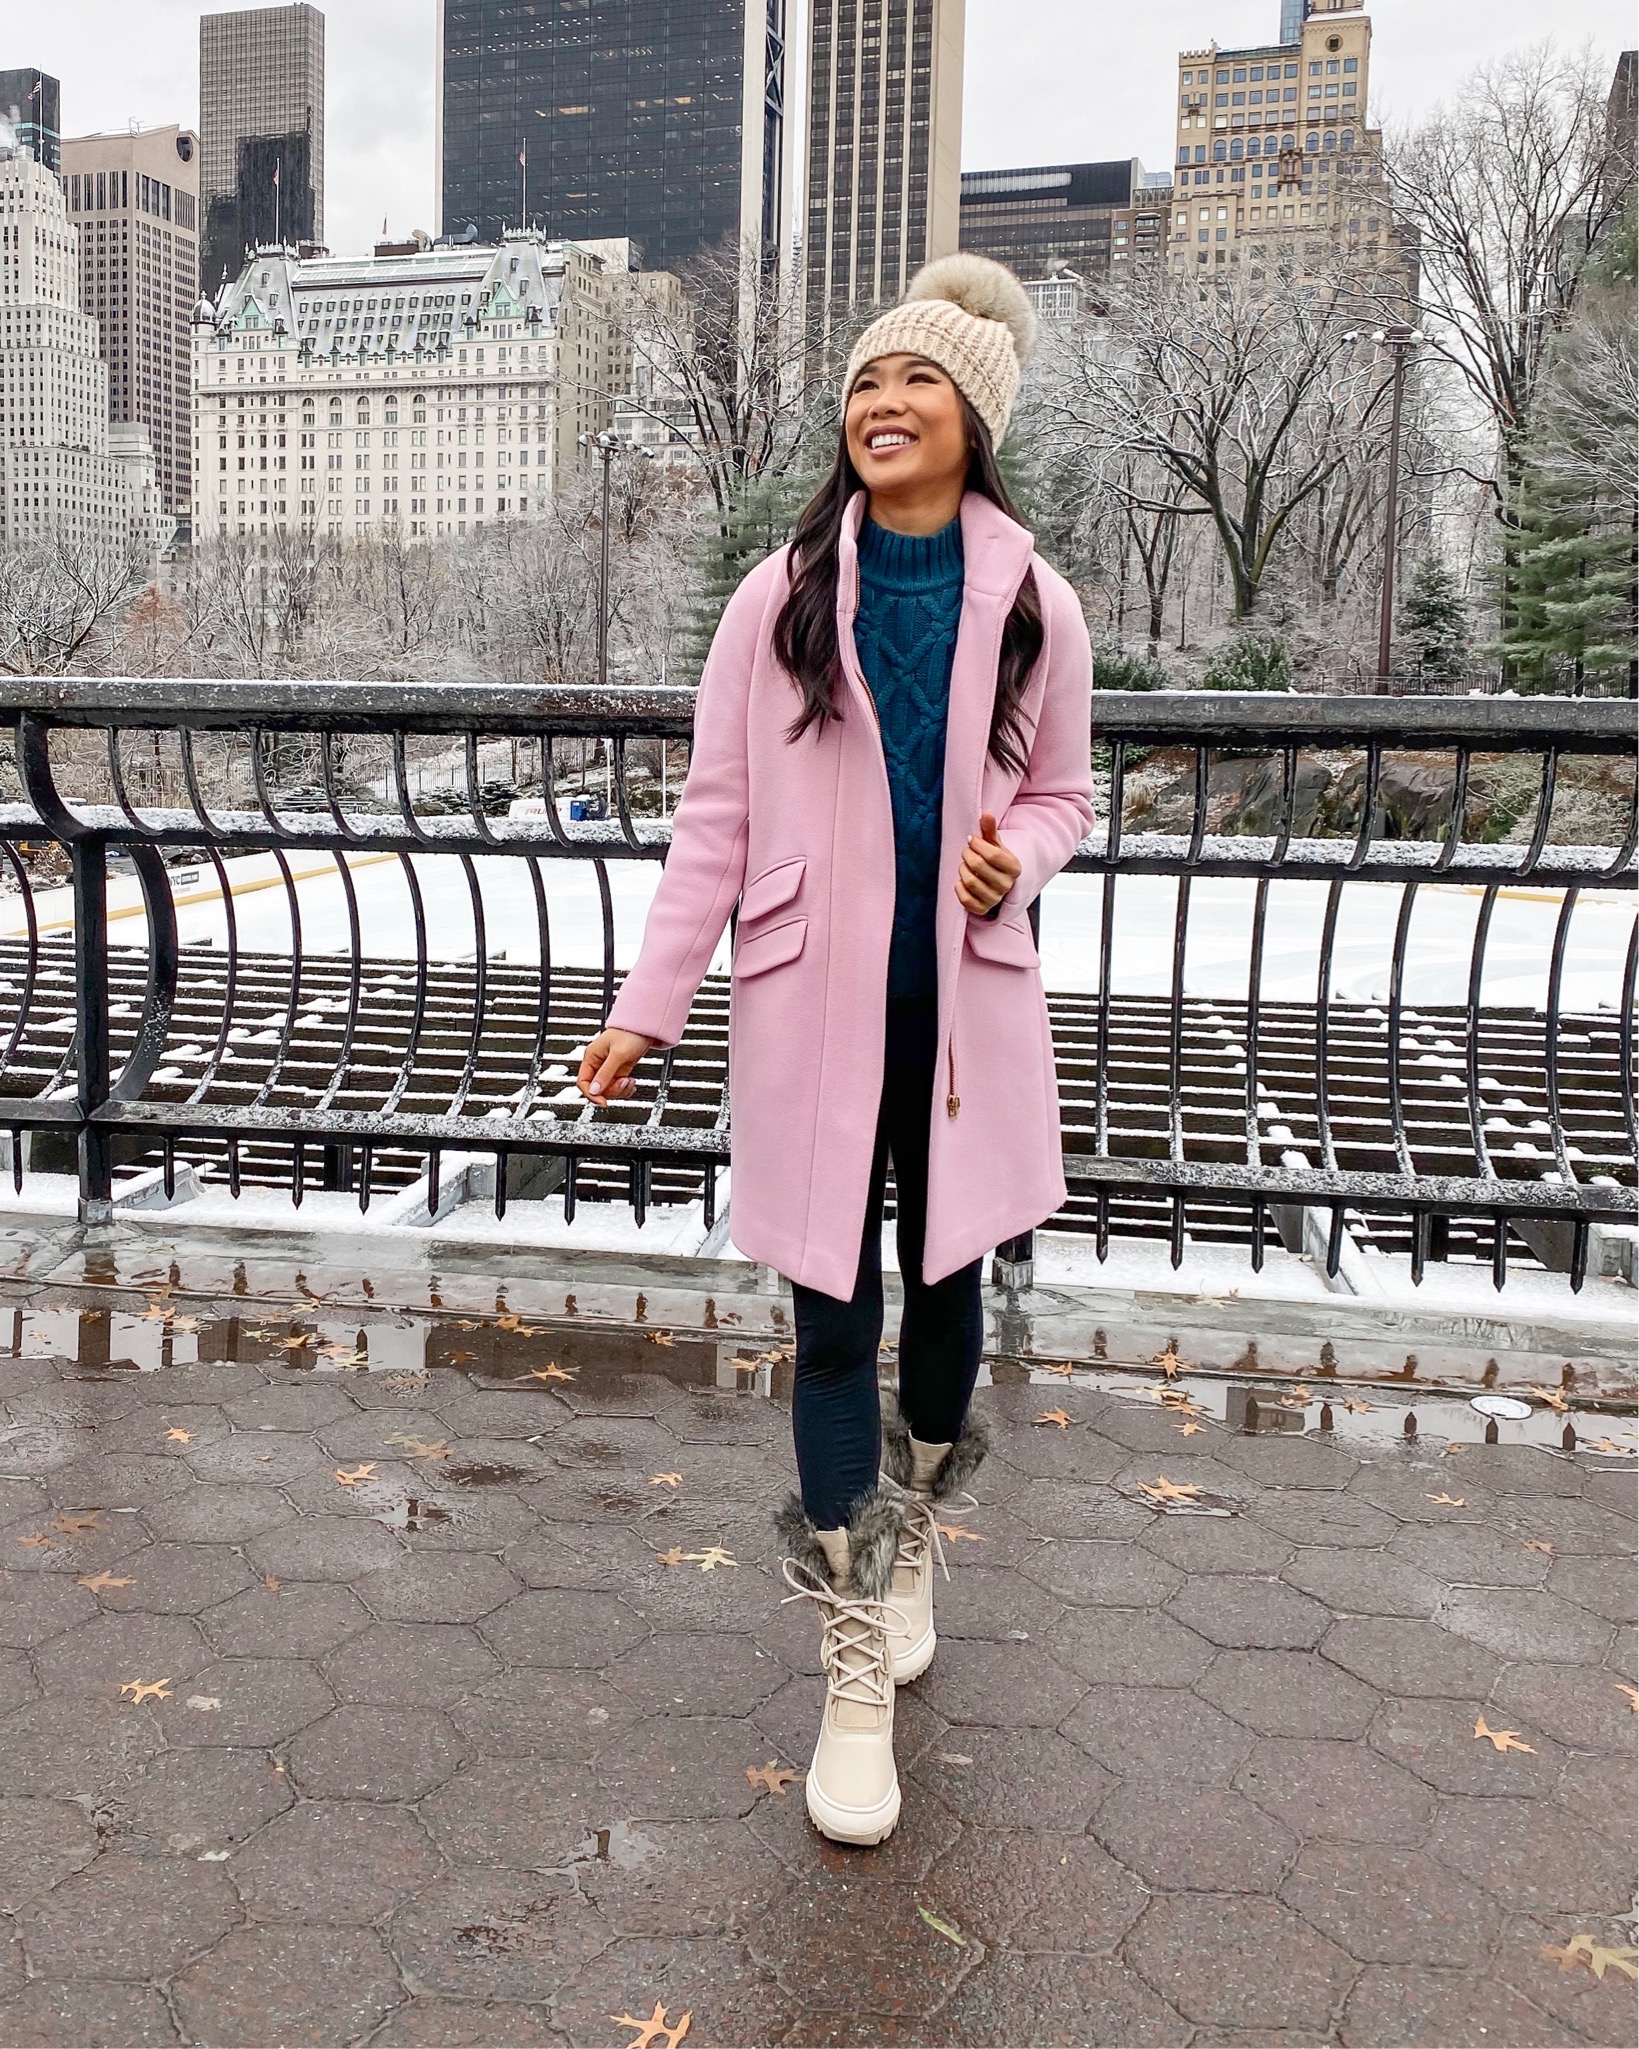 Cozy winter outfits with a pink winter coat and cream snowboots and oversized pom beanie in Central Park